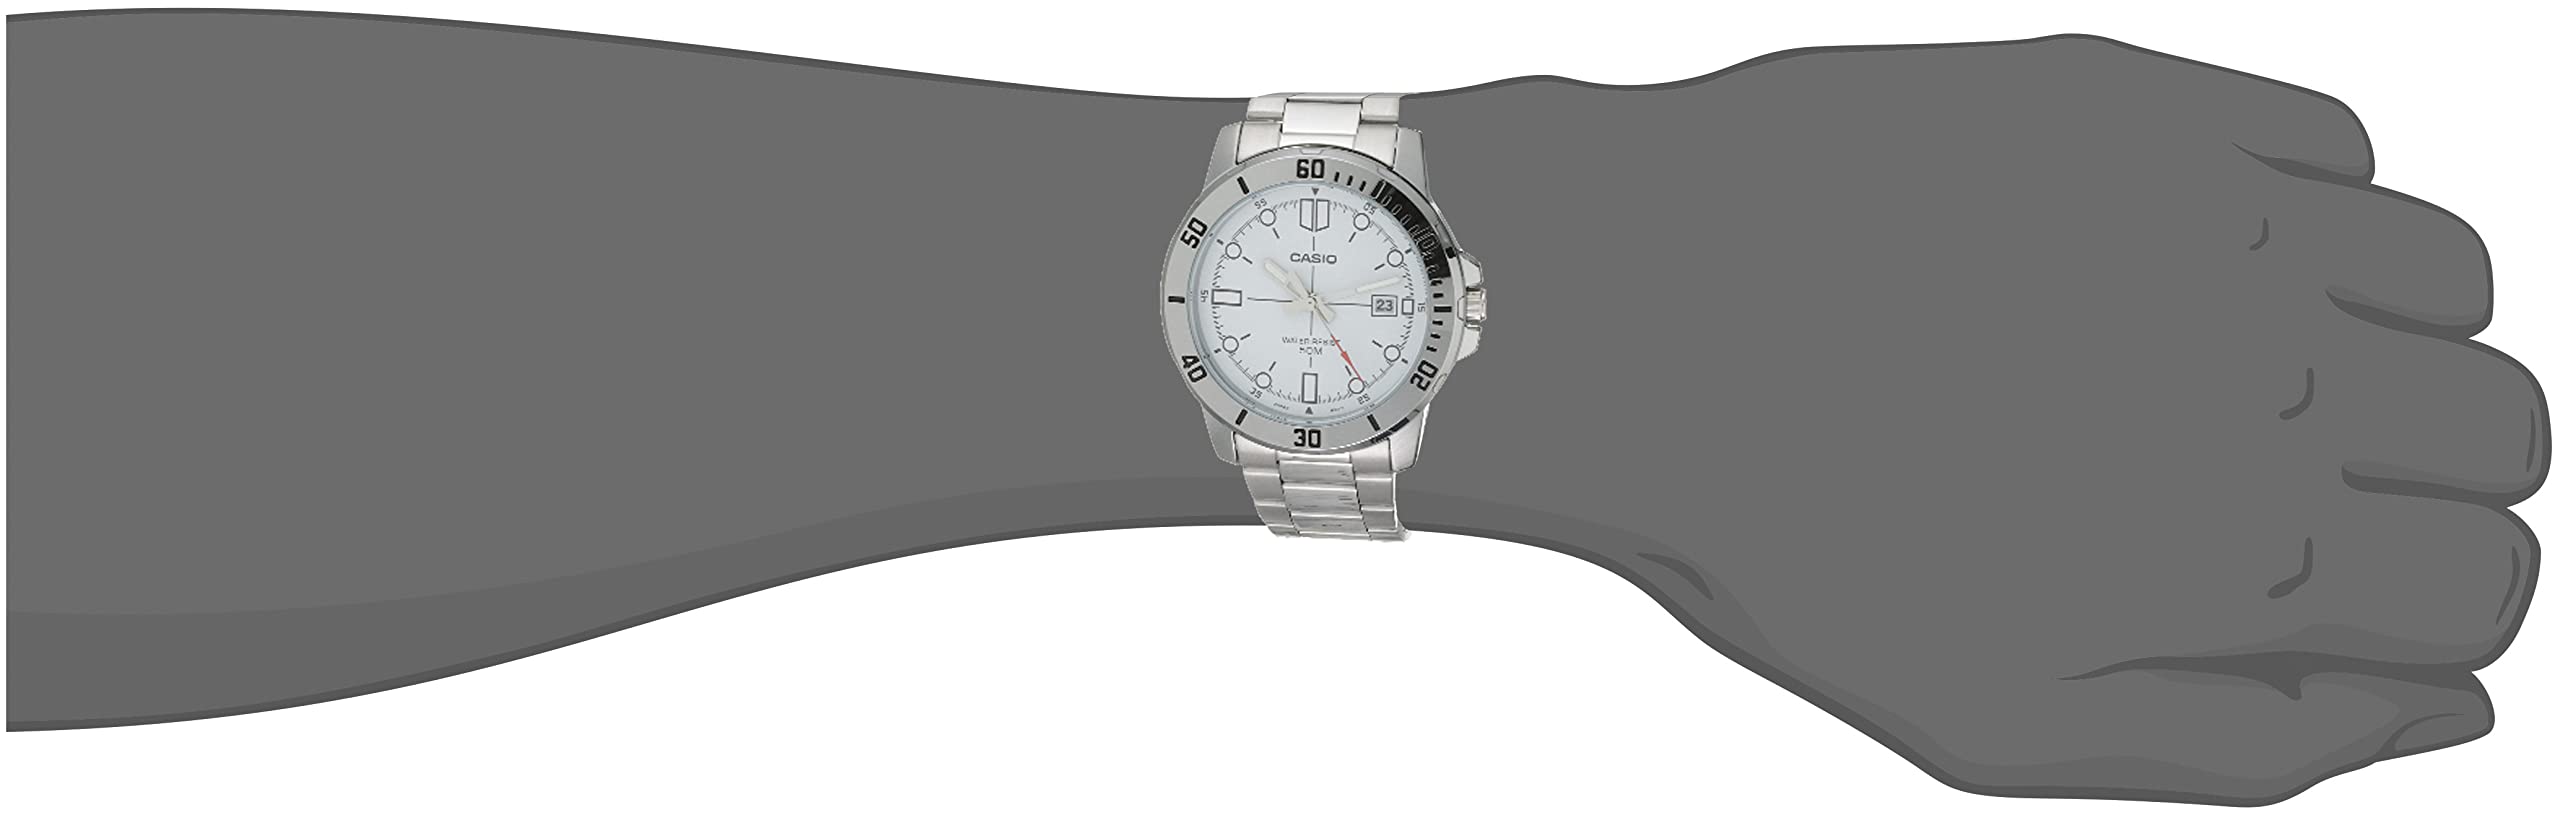 Casio Classic Silver-Tone Stainless Steel Band Date Indicator Watch (Model: MTP-VD01D-7EV)